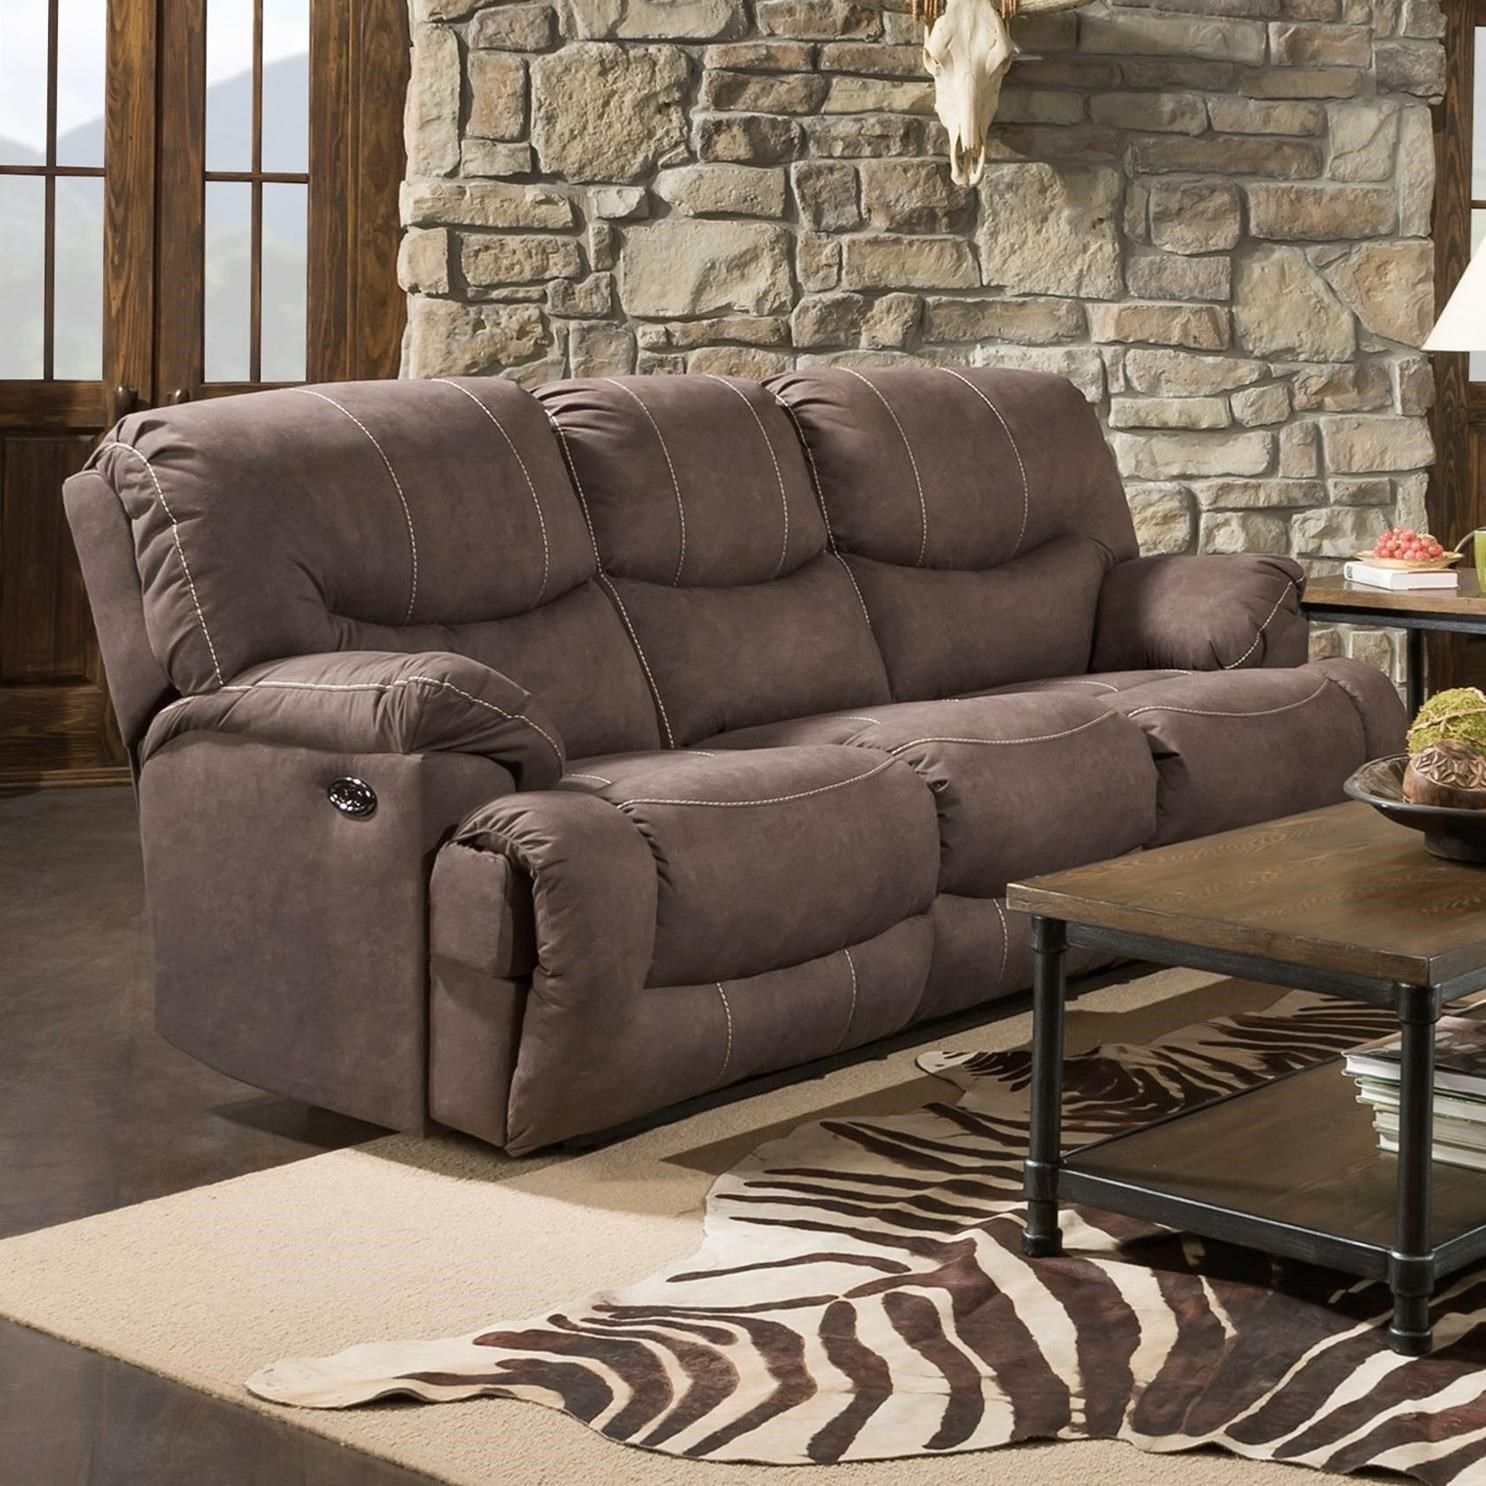 United Furniture Industries 50455br Casual Double Power With Regard To Power Reclining Sofas (View 4 of 15)